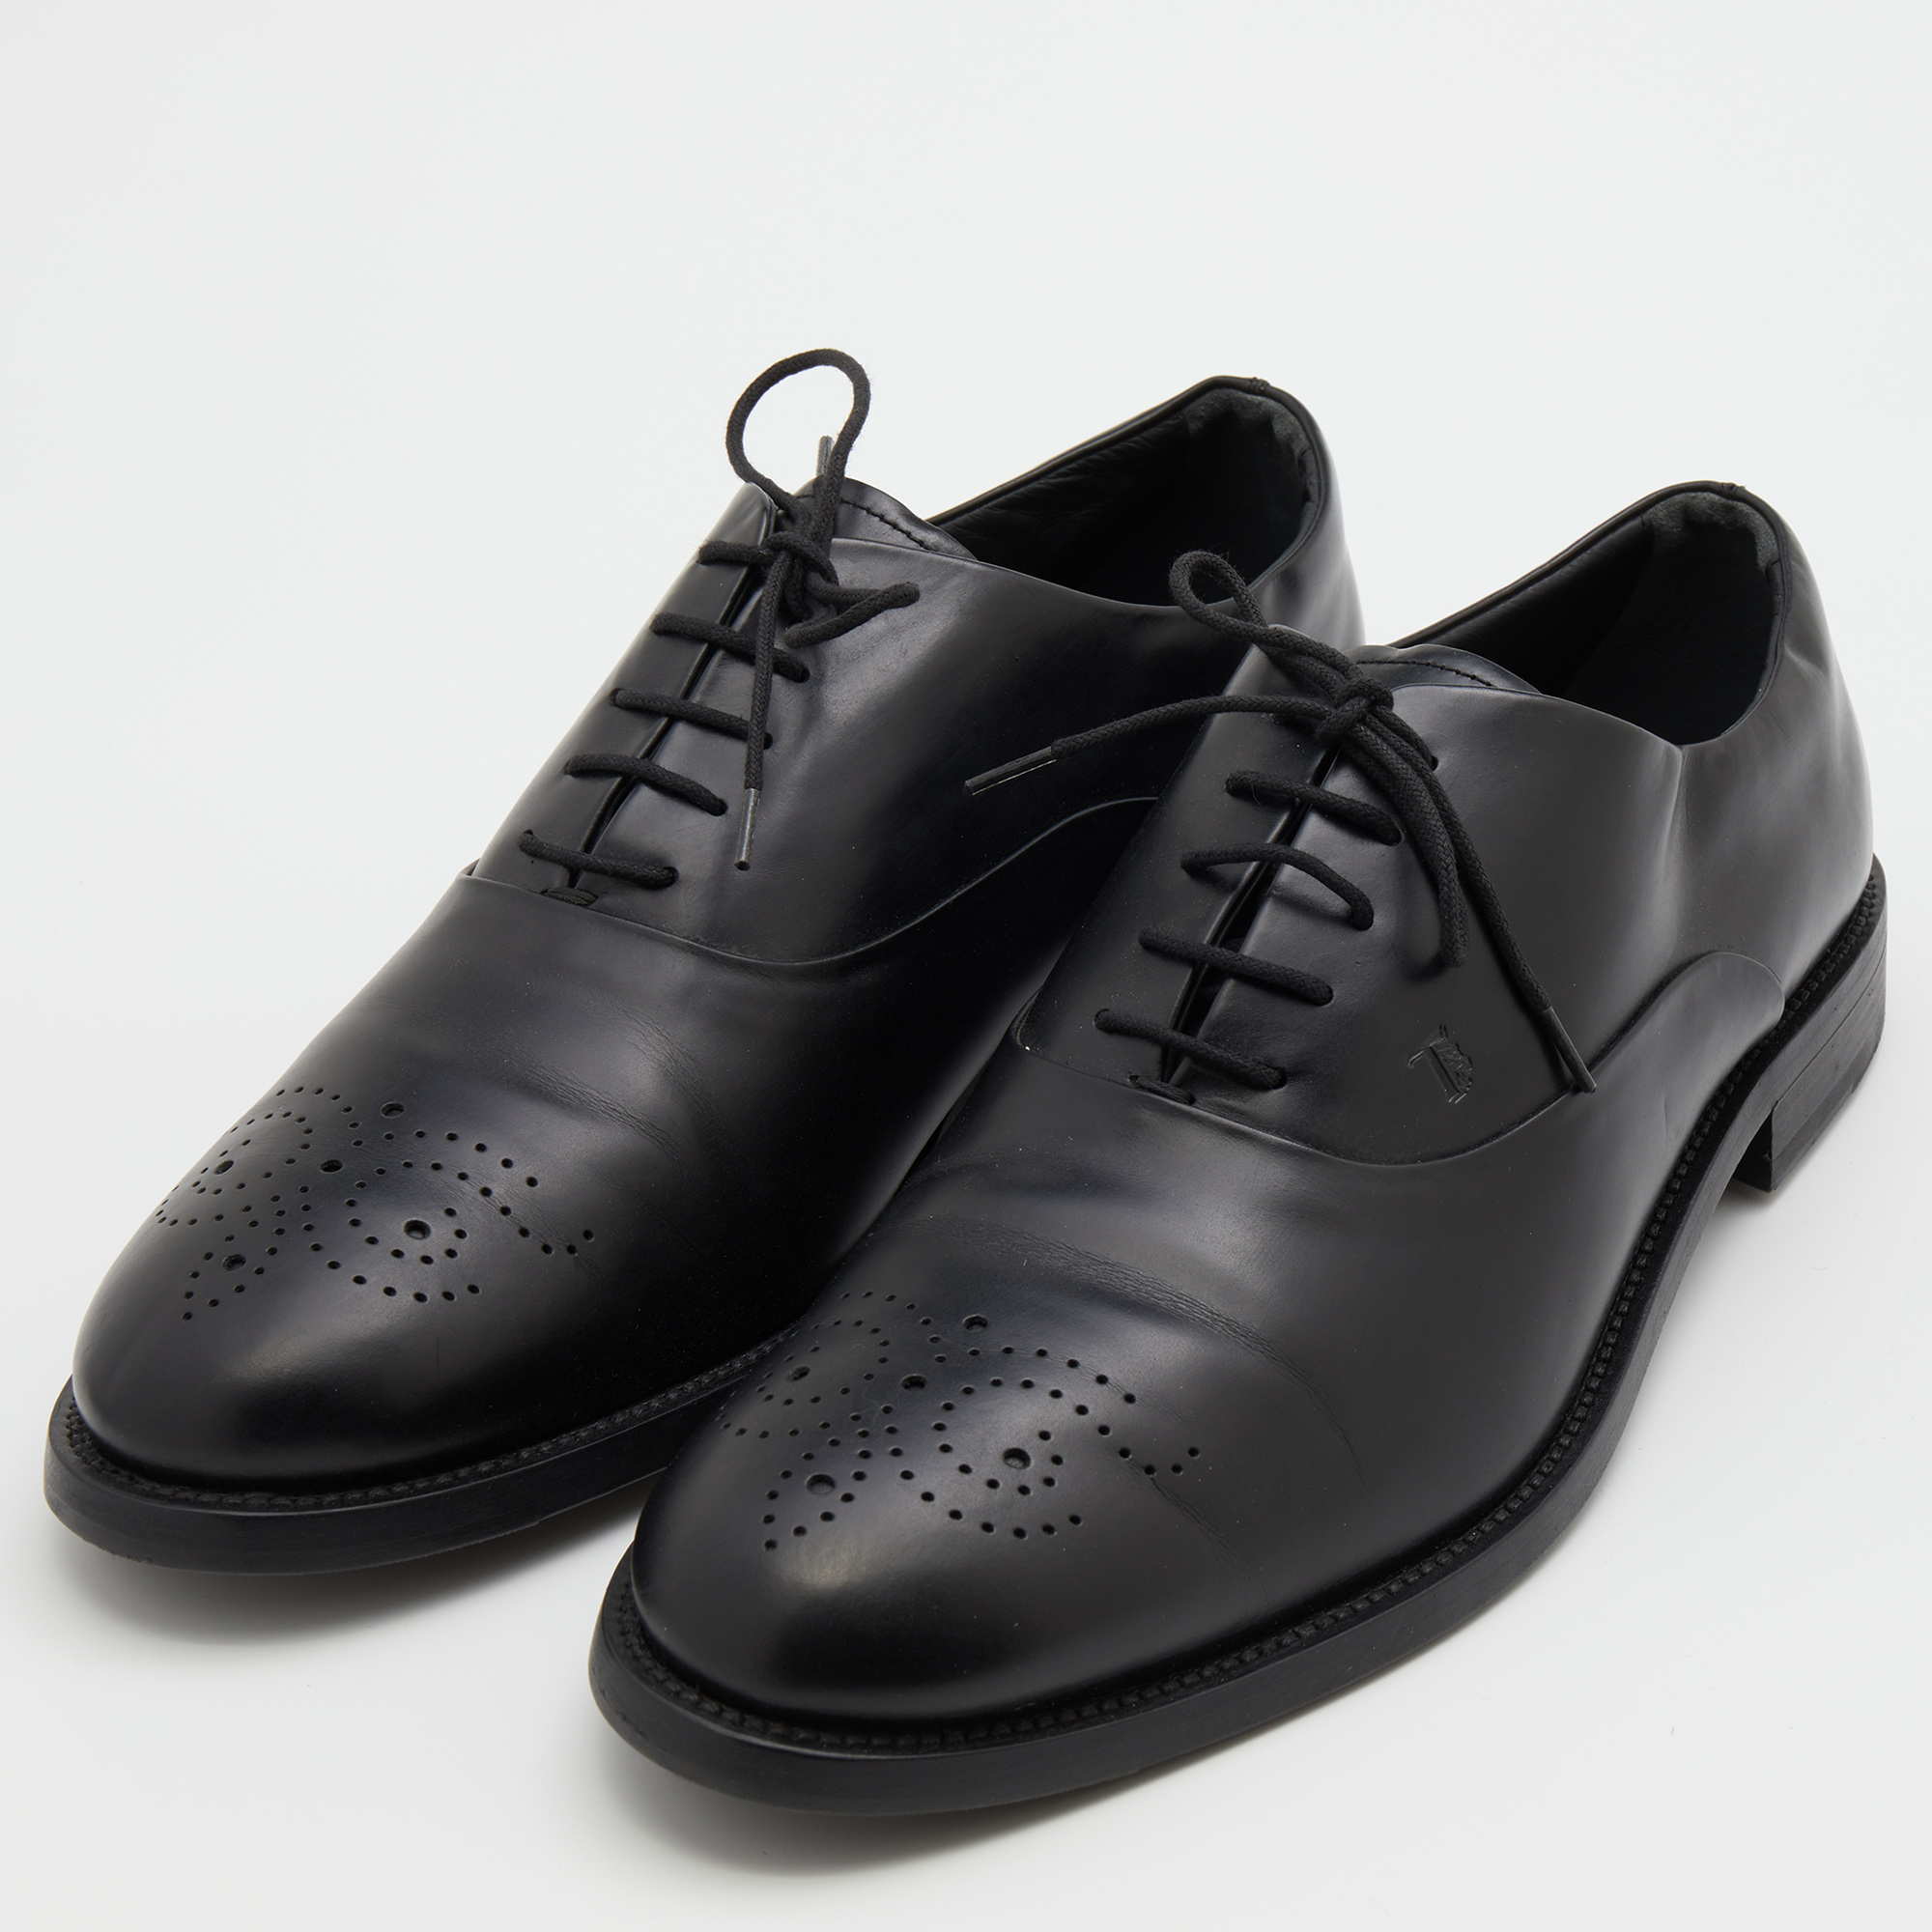 

Tod's Black Leather Brogue Lace Up Oxfords Size